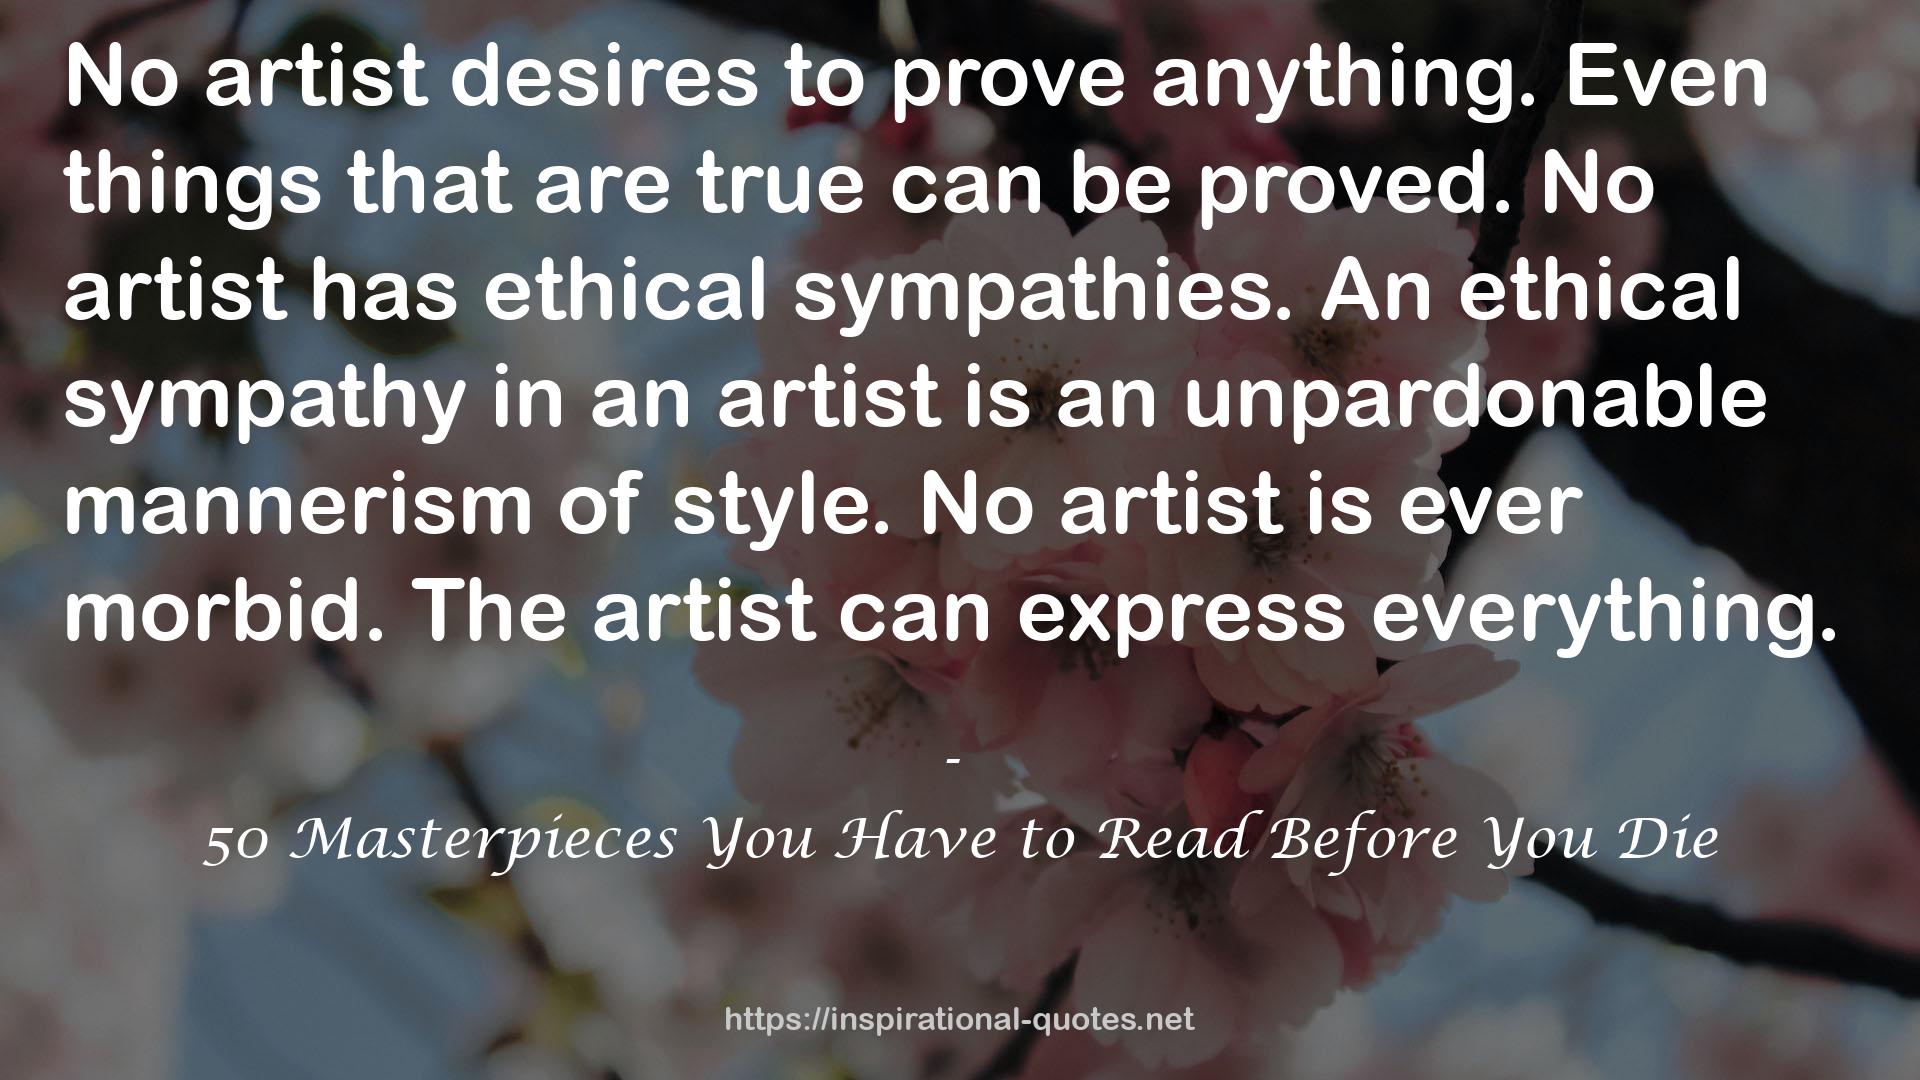 50 Masterpieces You Have to Read Before You Die QUOTES